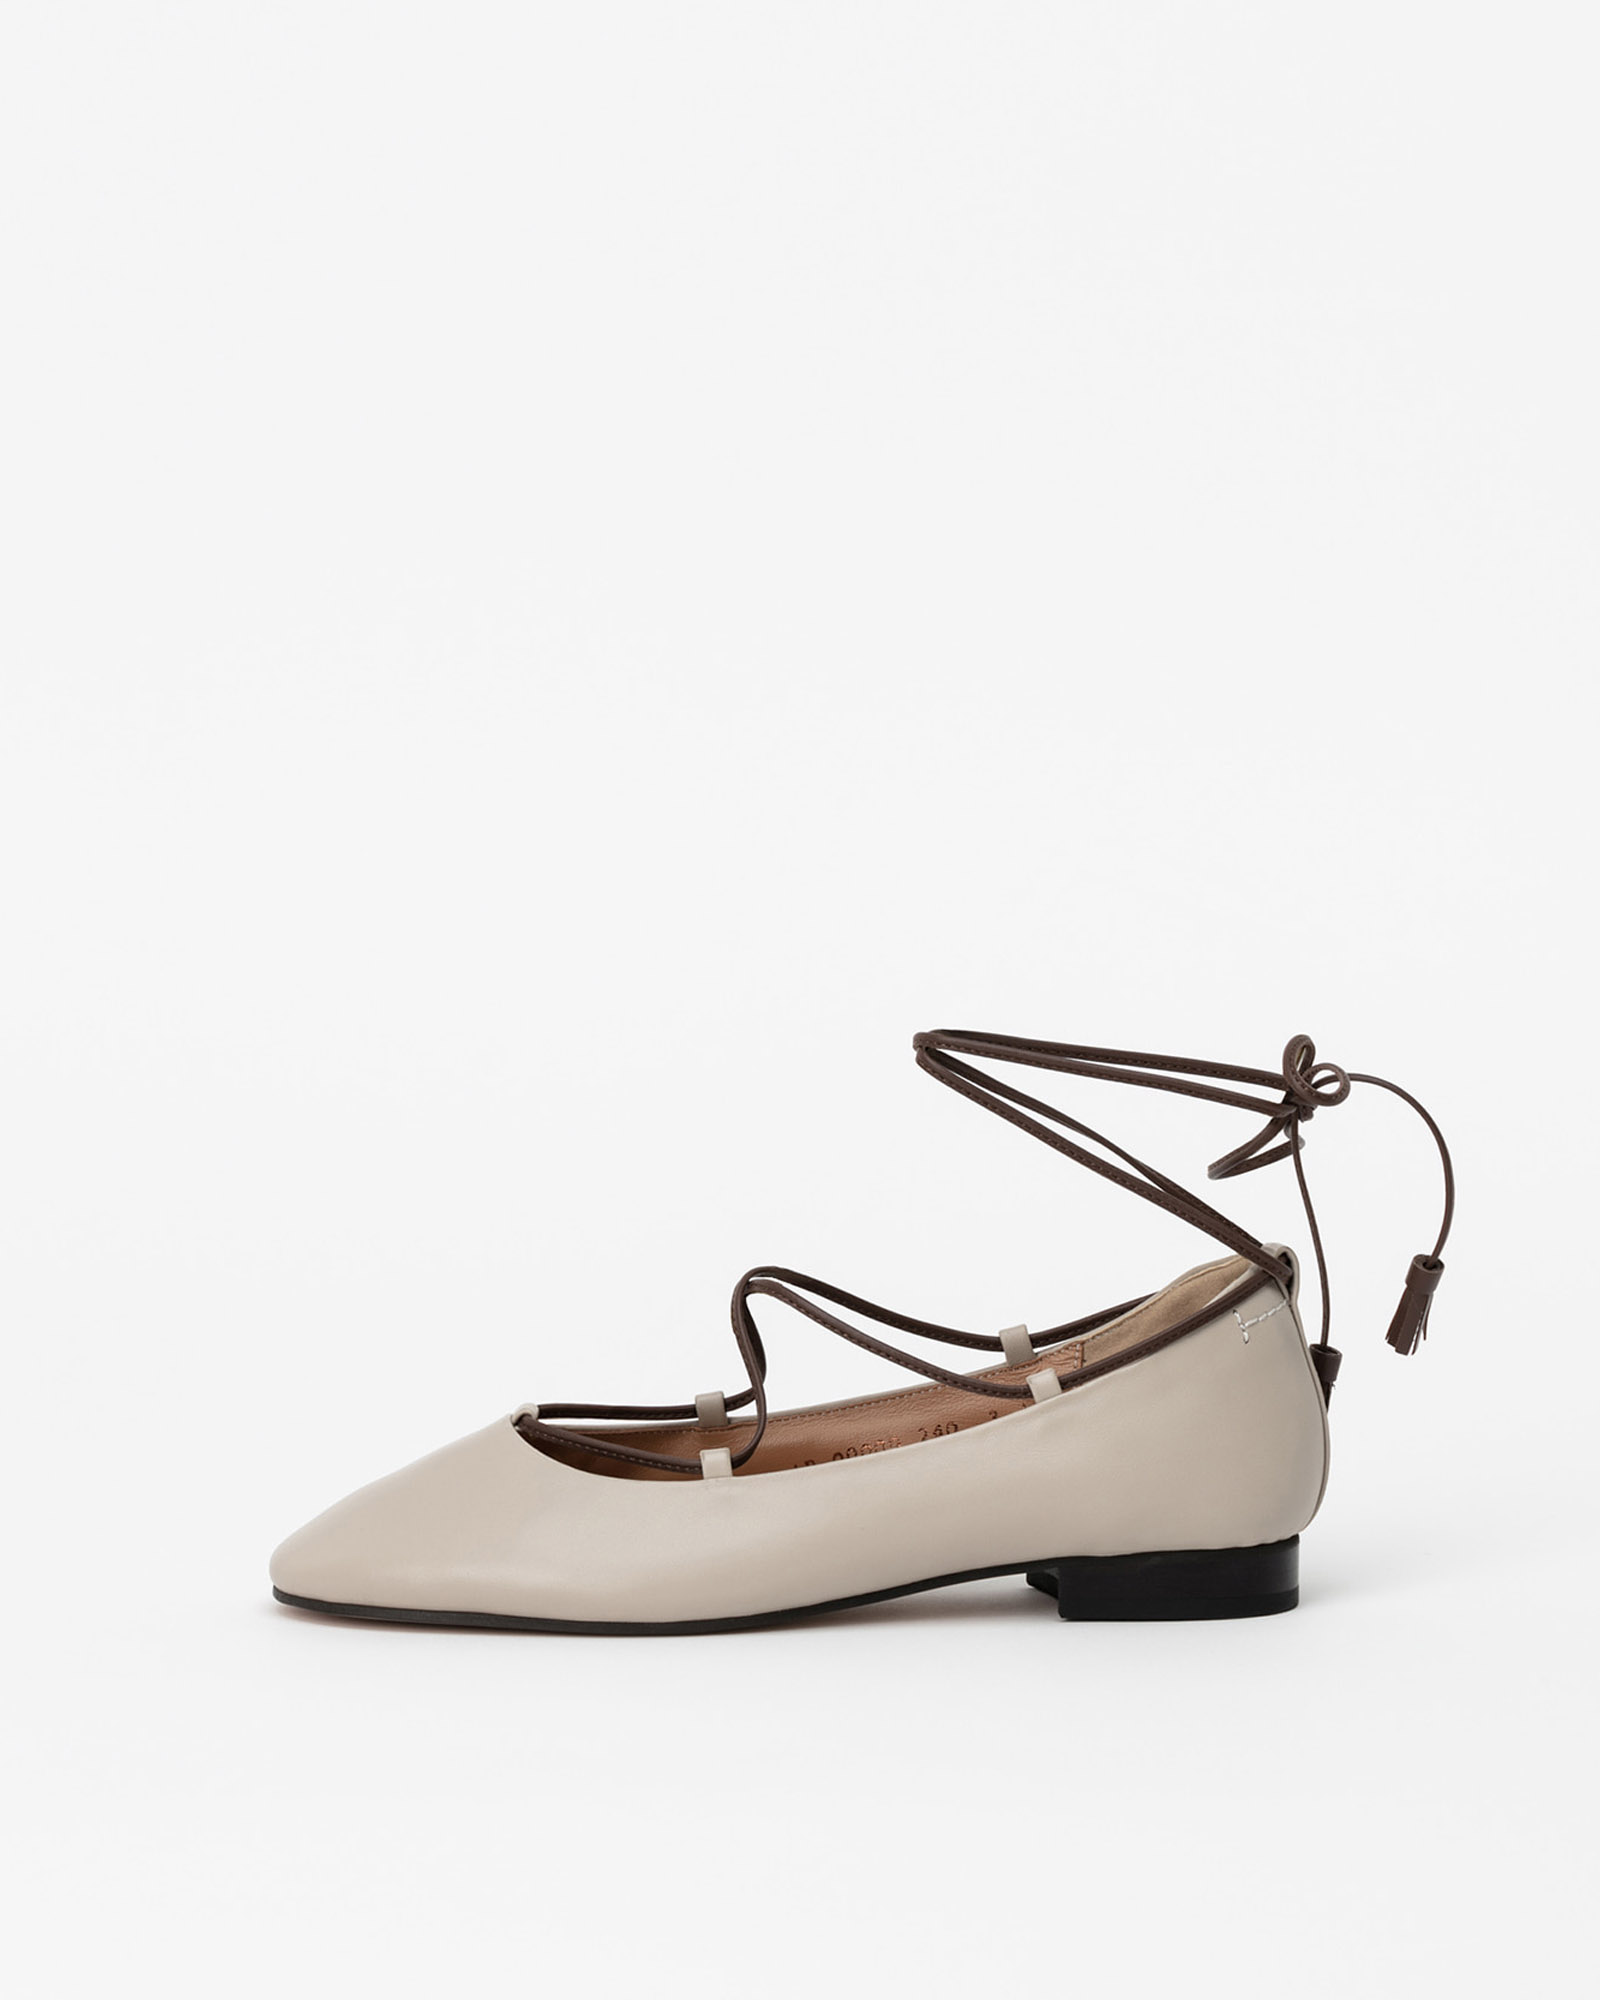 Ladonna Strap Flat Shoes in Taupe Ivory